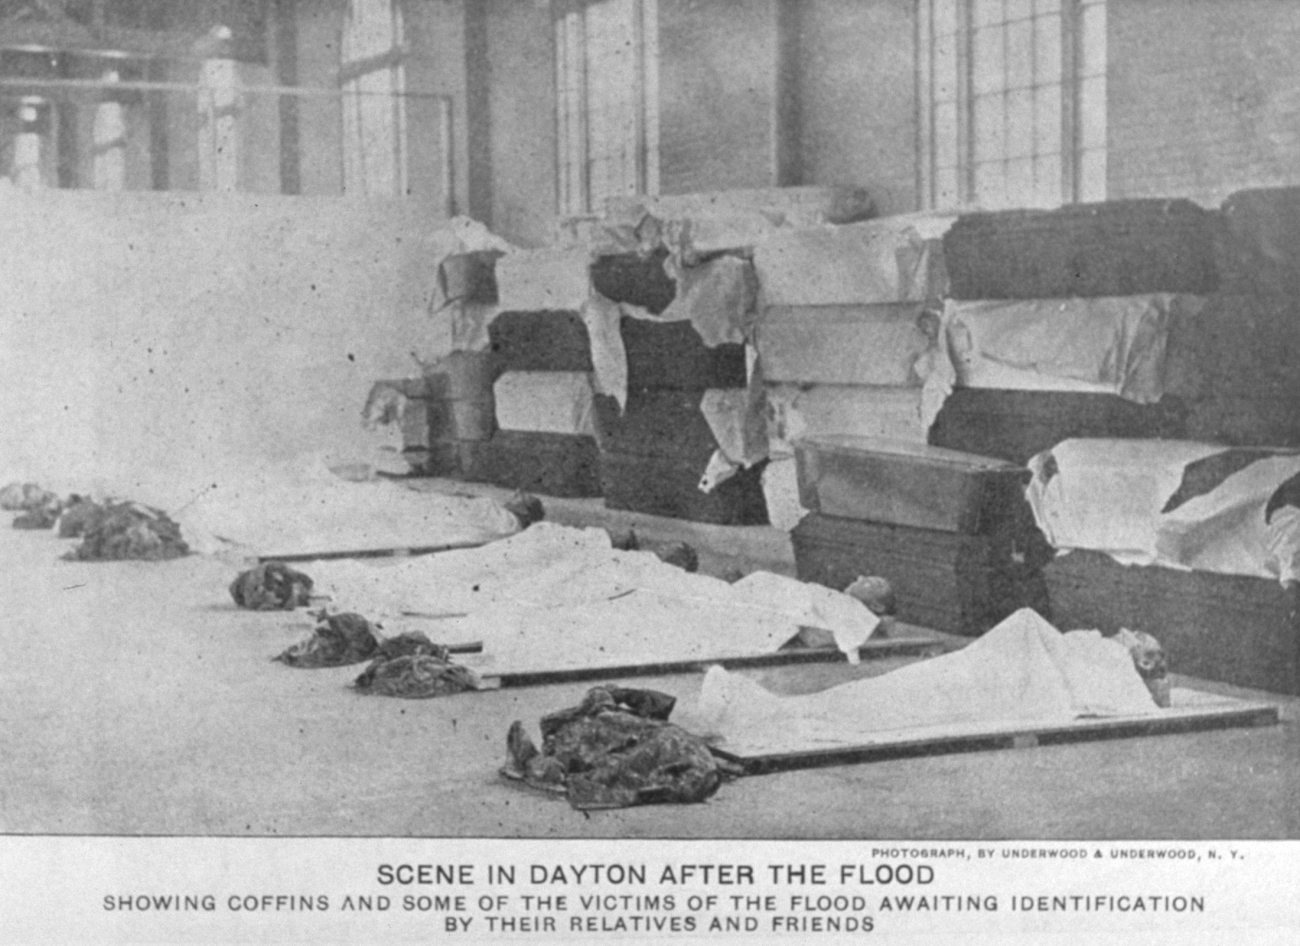 Unidentified bodies in the morgue at Dayton after the flood